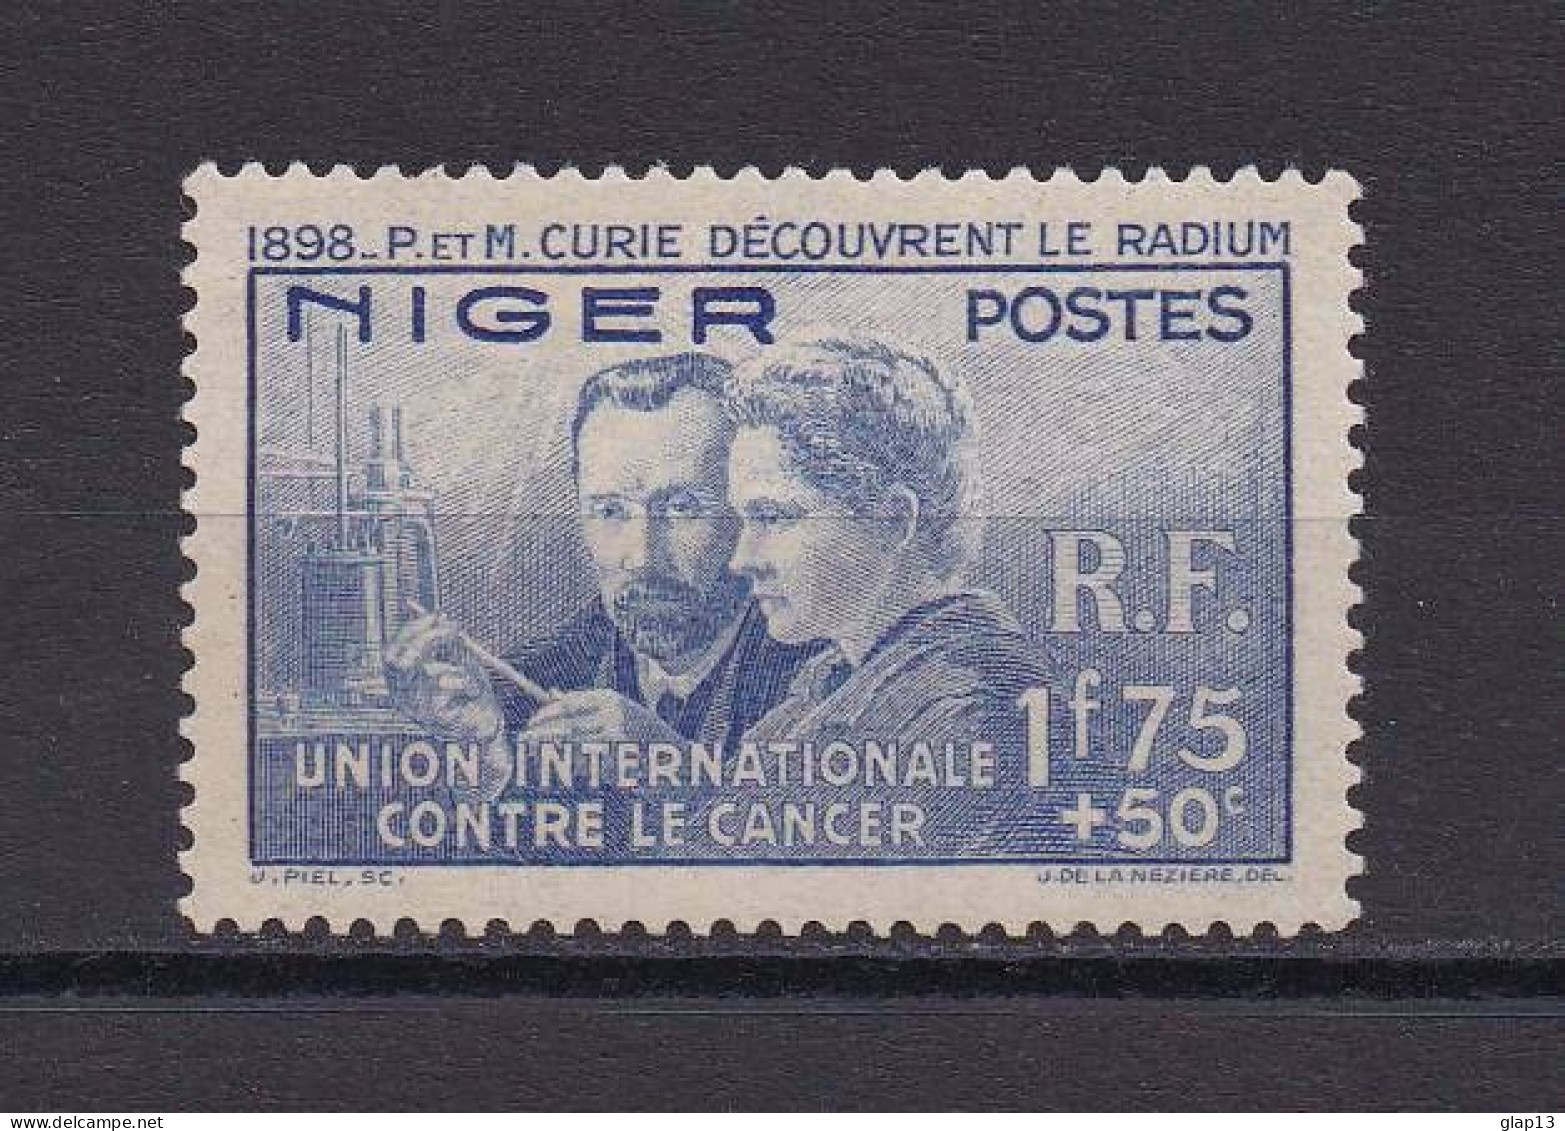 NIGER 1938 TIMBRE N°63 NEUF** PIERRE ET MARIE CURIE - Unused Stamps